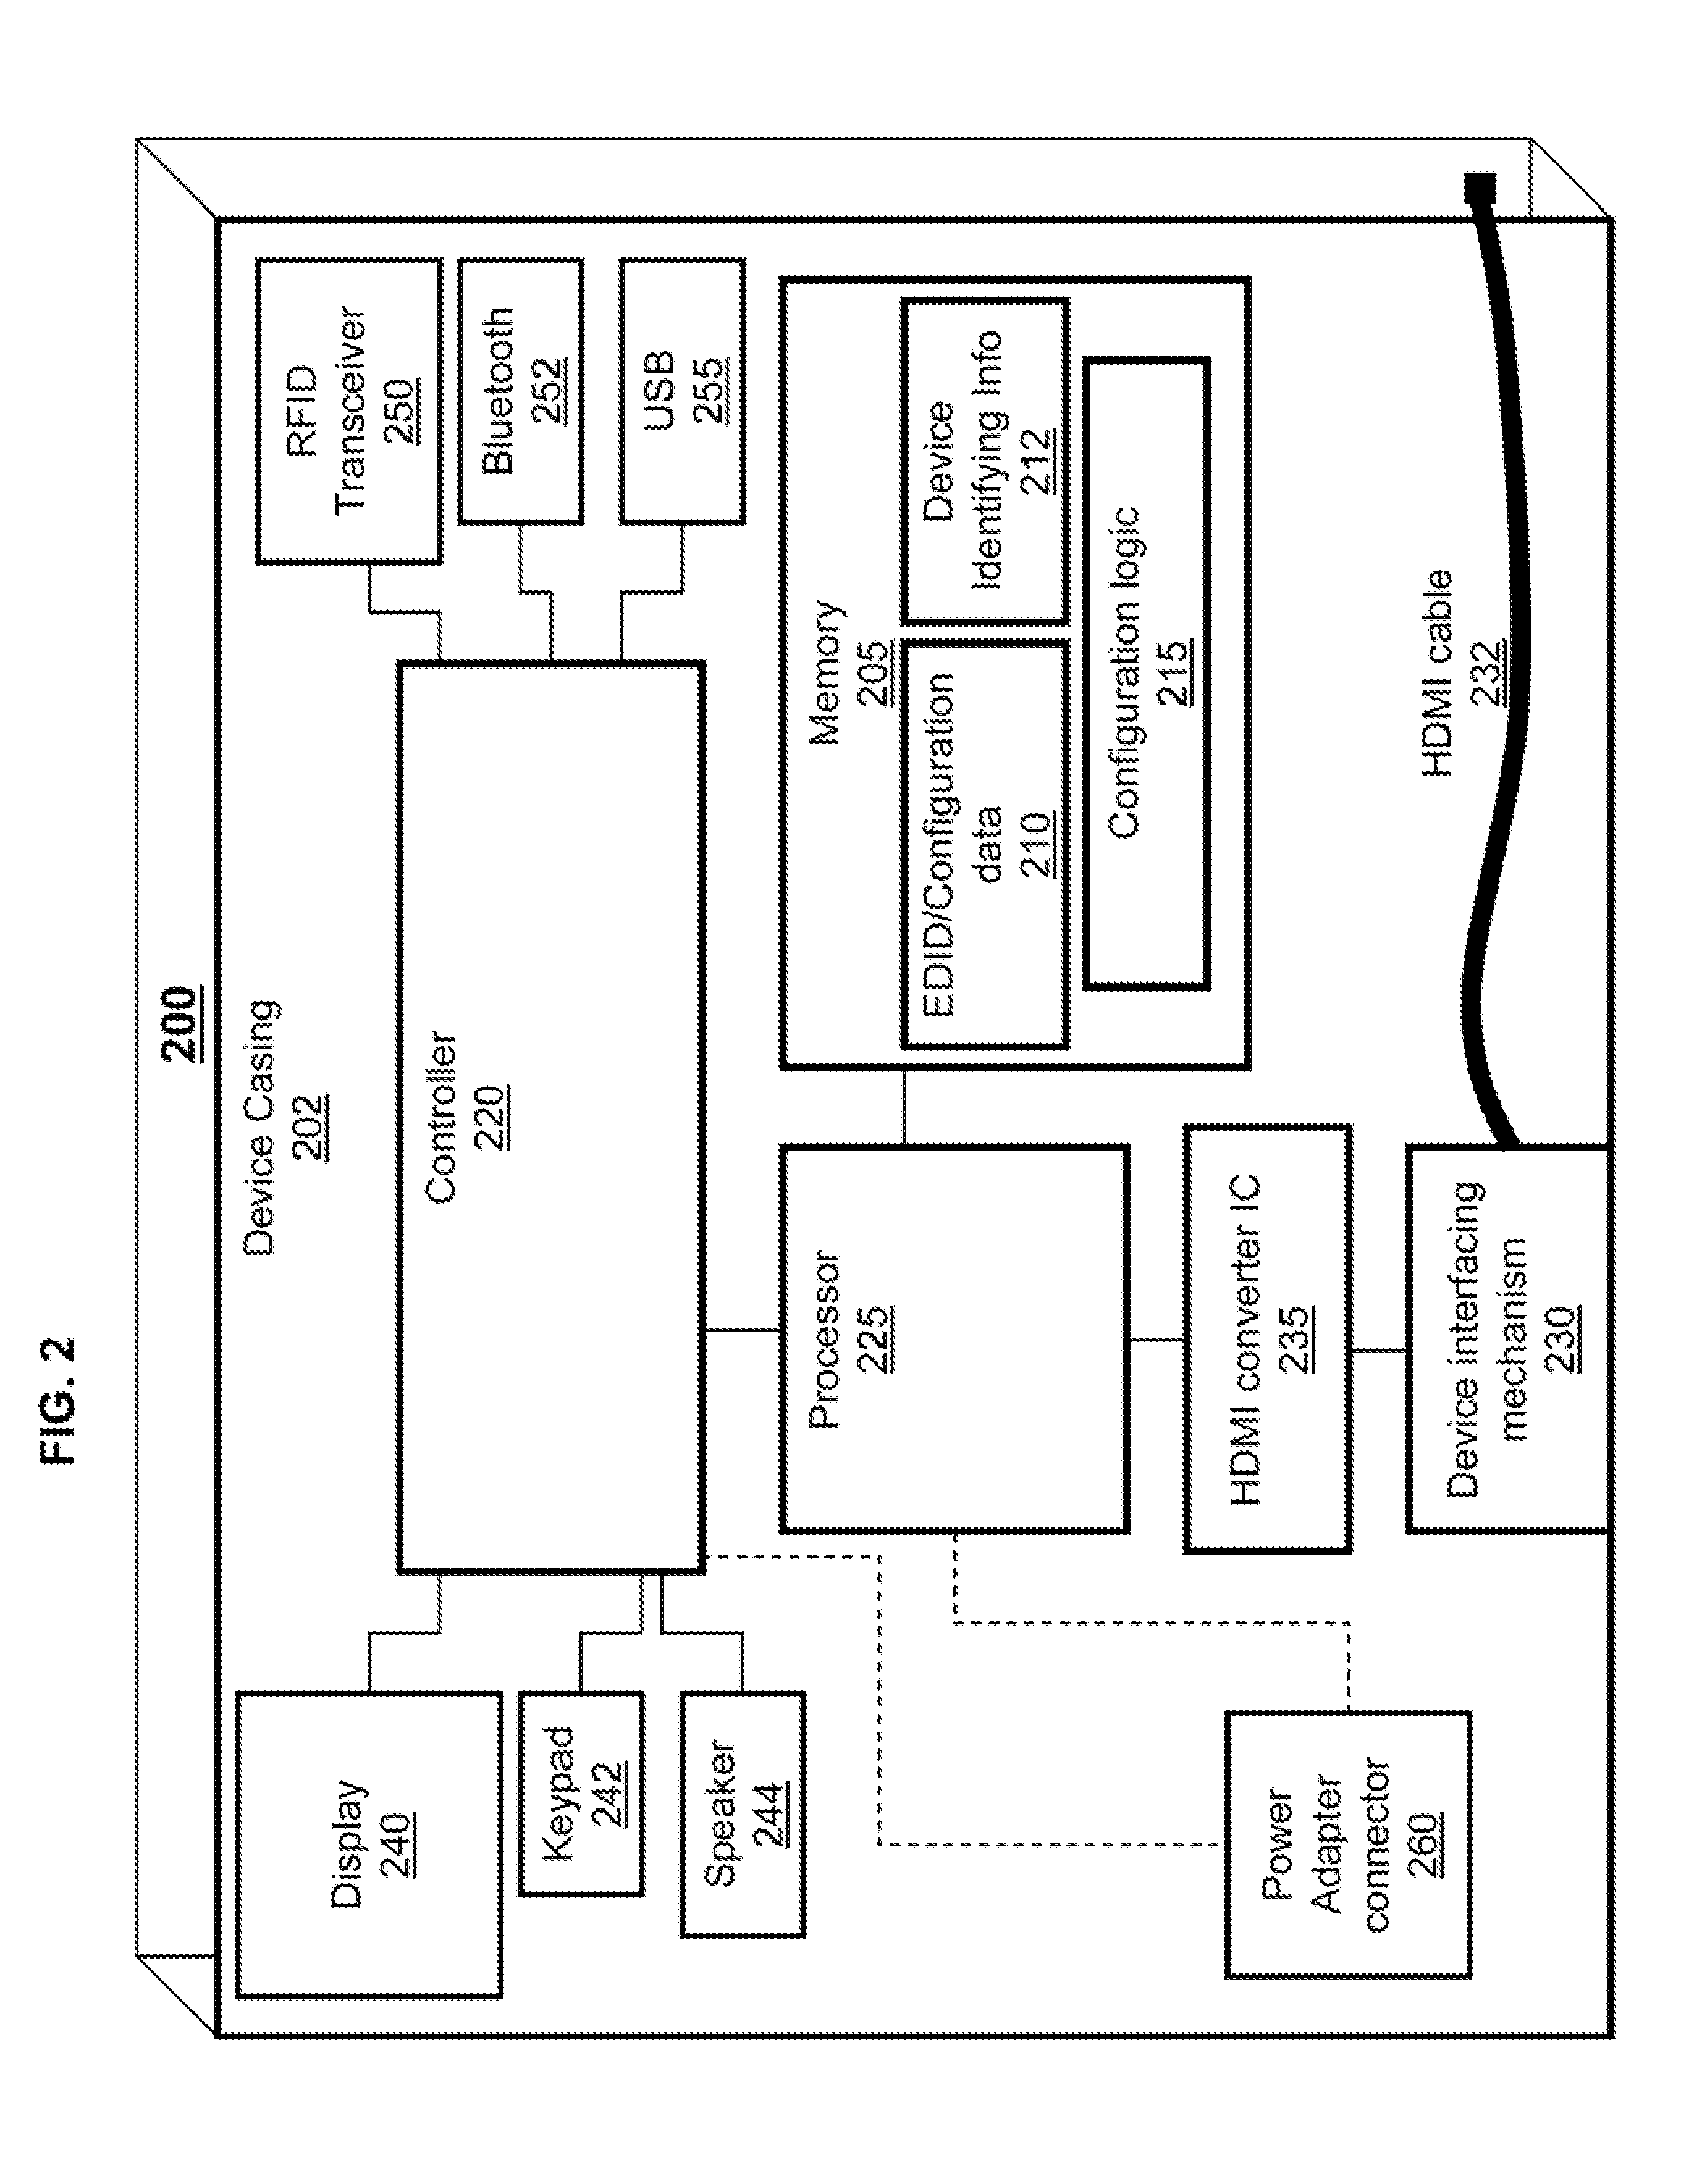 Method and apparatus to prevent receiver desensitization from radiated HDMI signals in accessor or computing devices